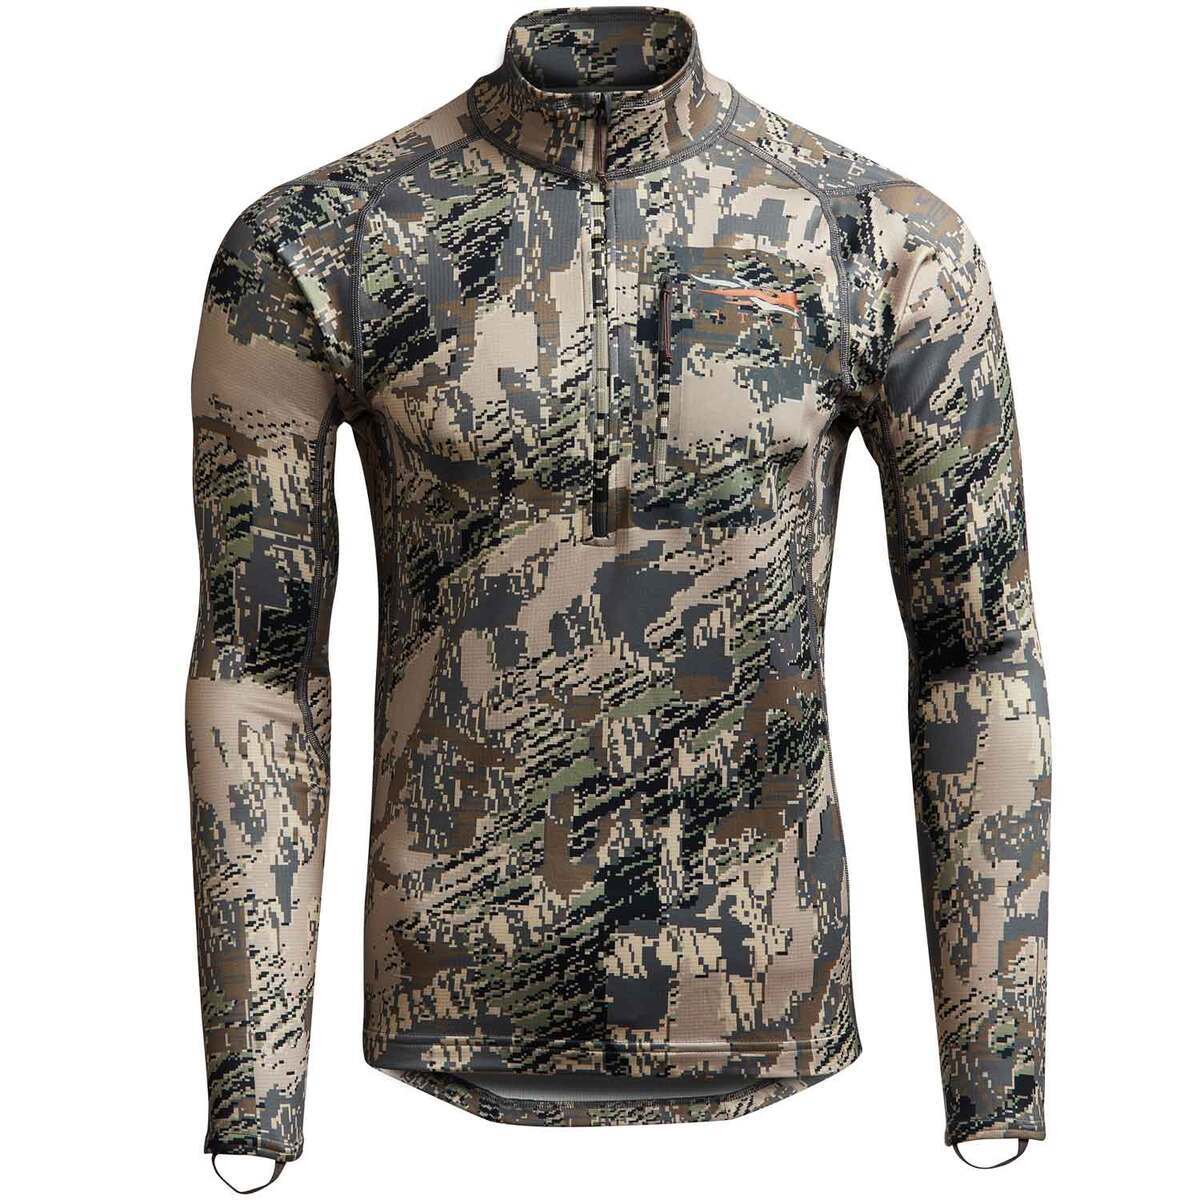 Sitka Core Midweight Zip-T - Optifade Open Country | Sportsman's Warehouse